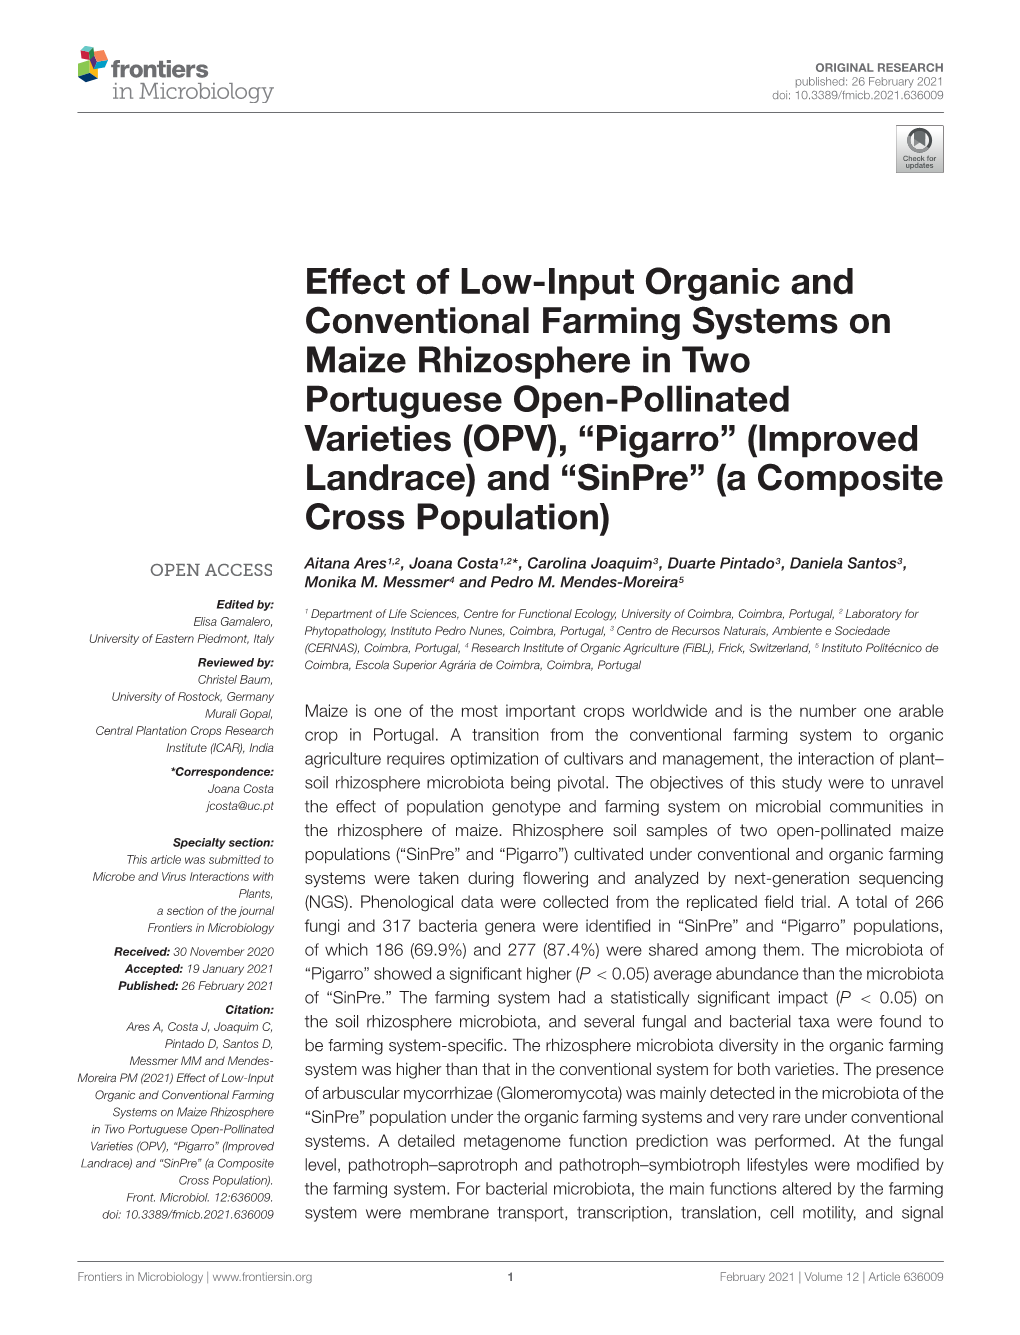 Effect of Low-Input Organic and Conventional Farming Systems On